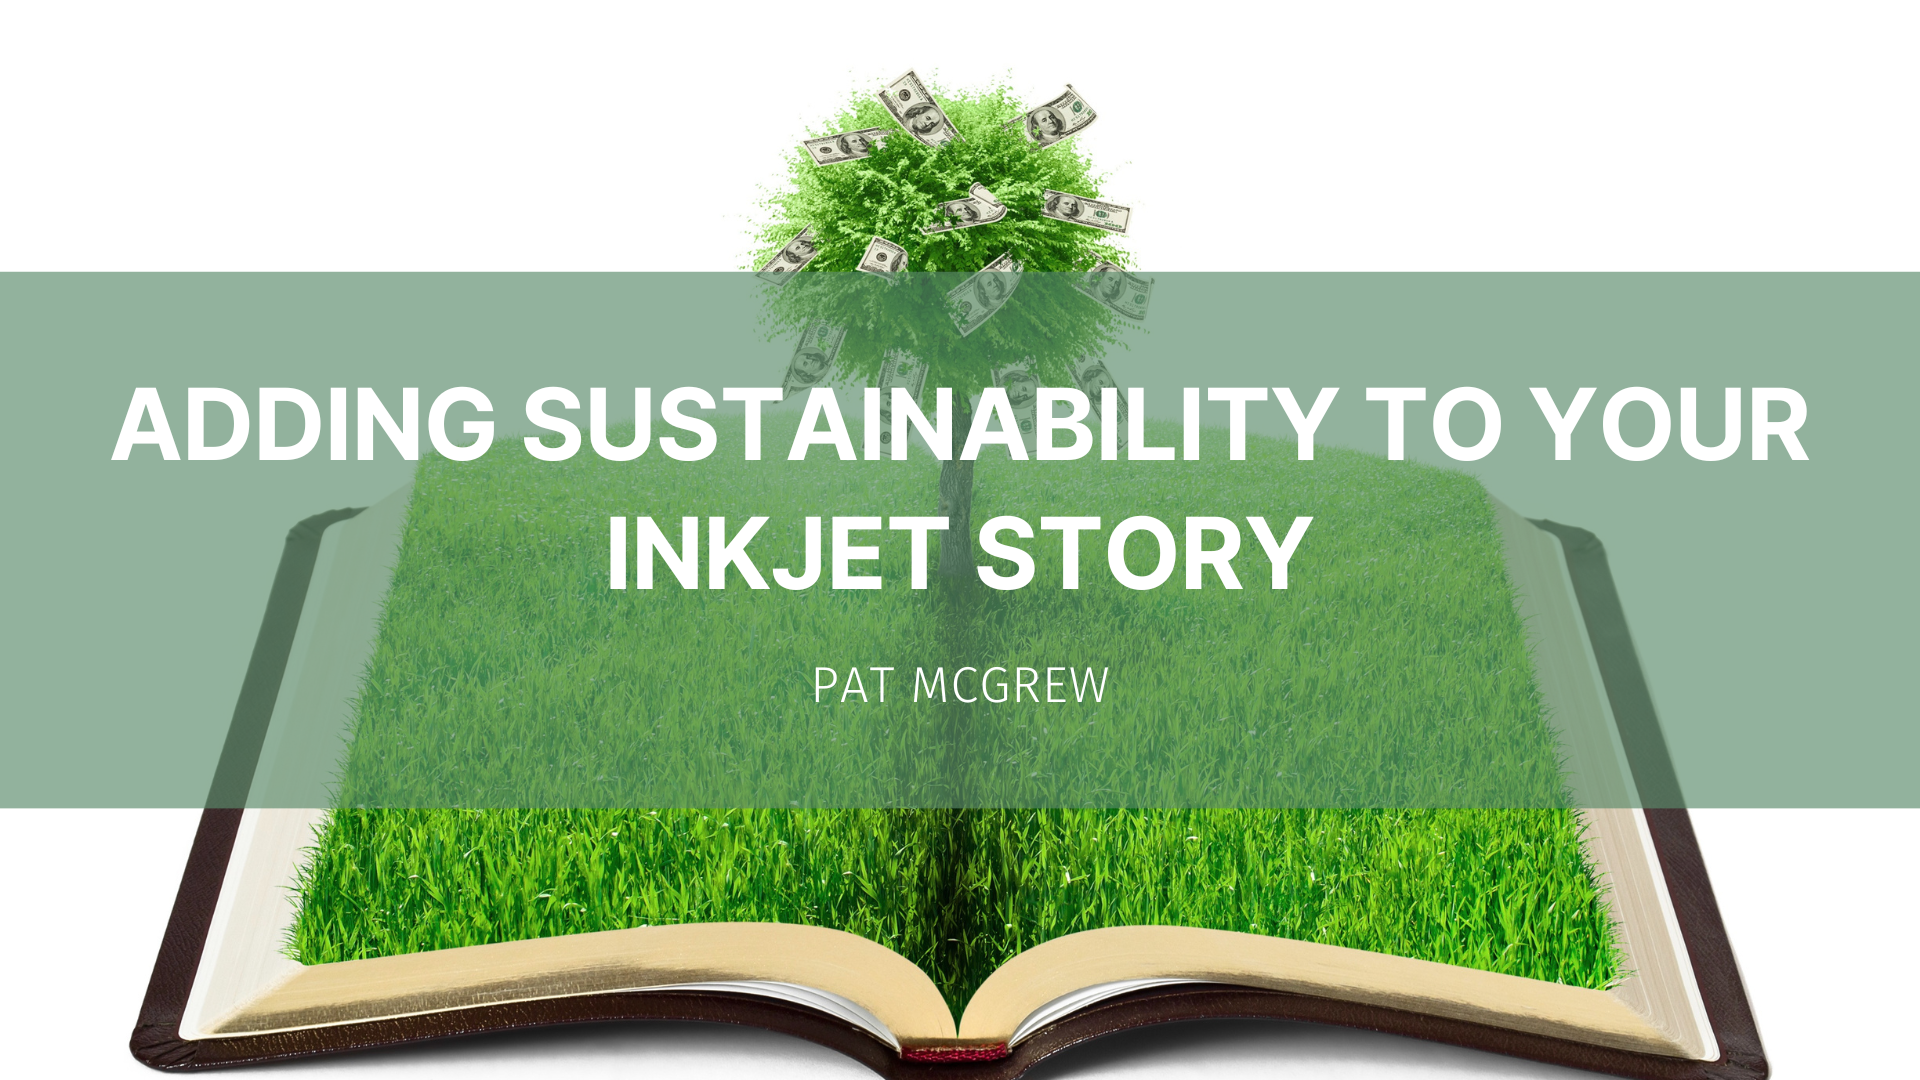 Featured image for “Adding sustainability to your inkjet story”